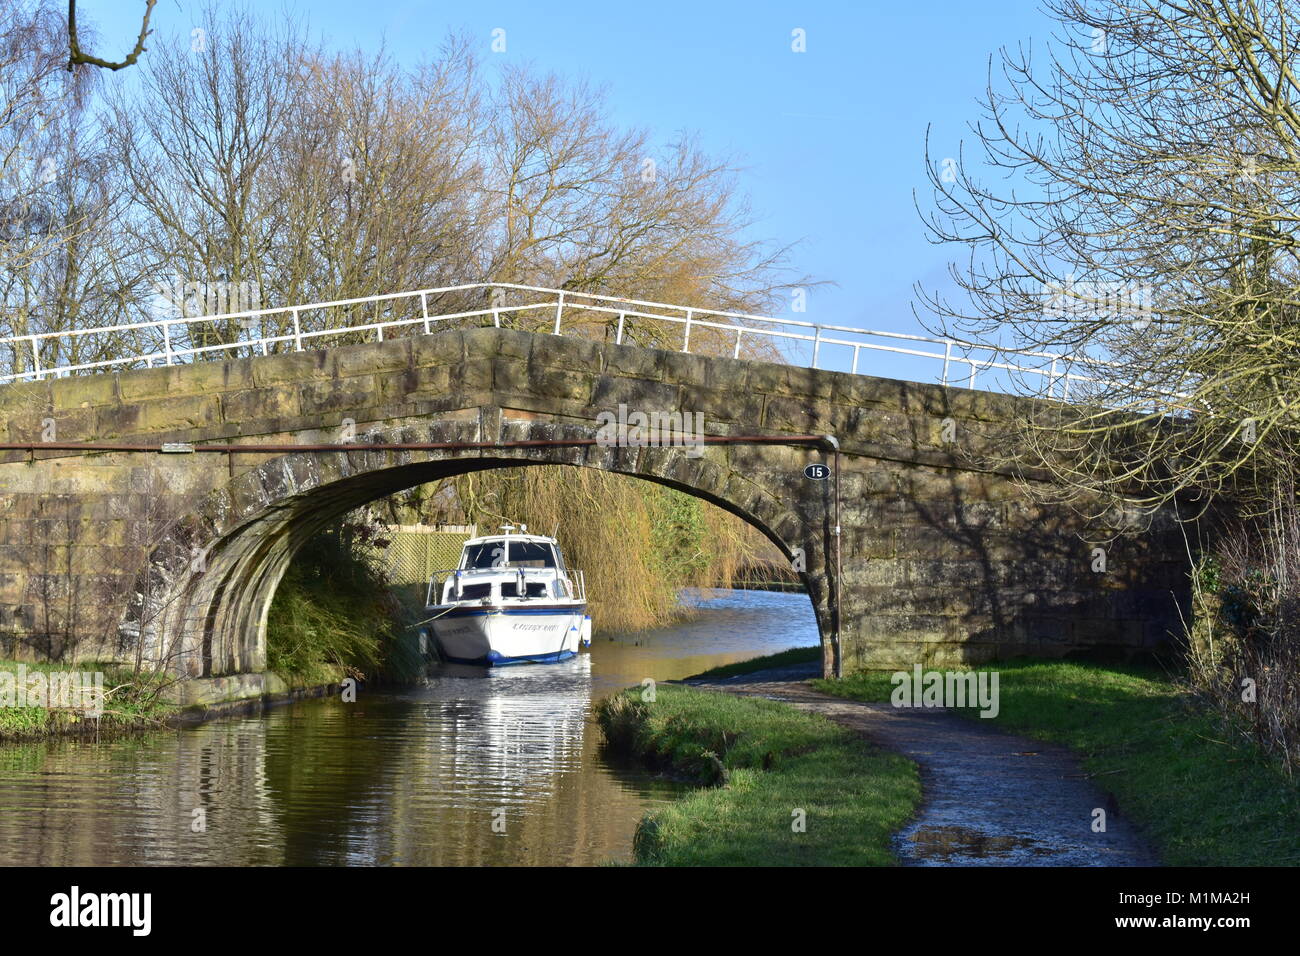 canal bridge with boat Stock Photo